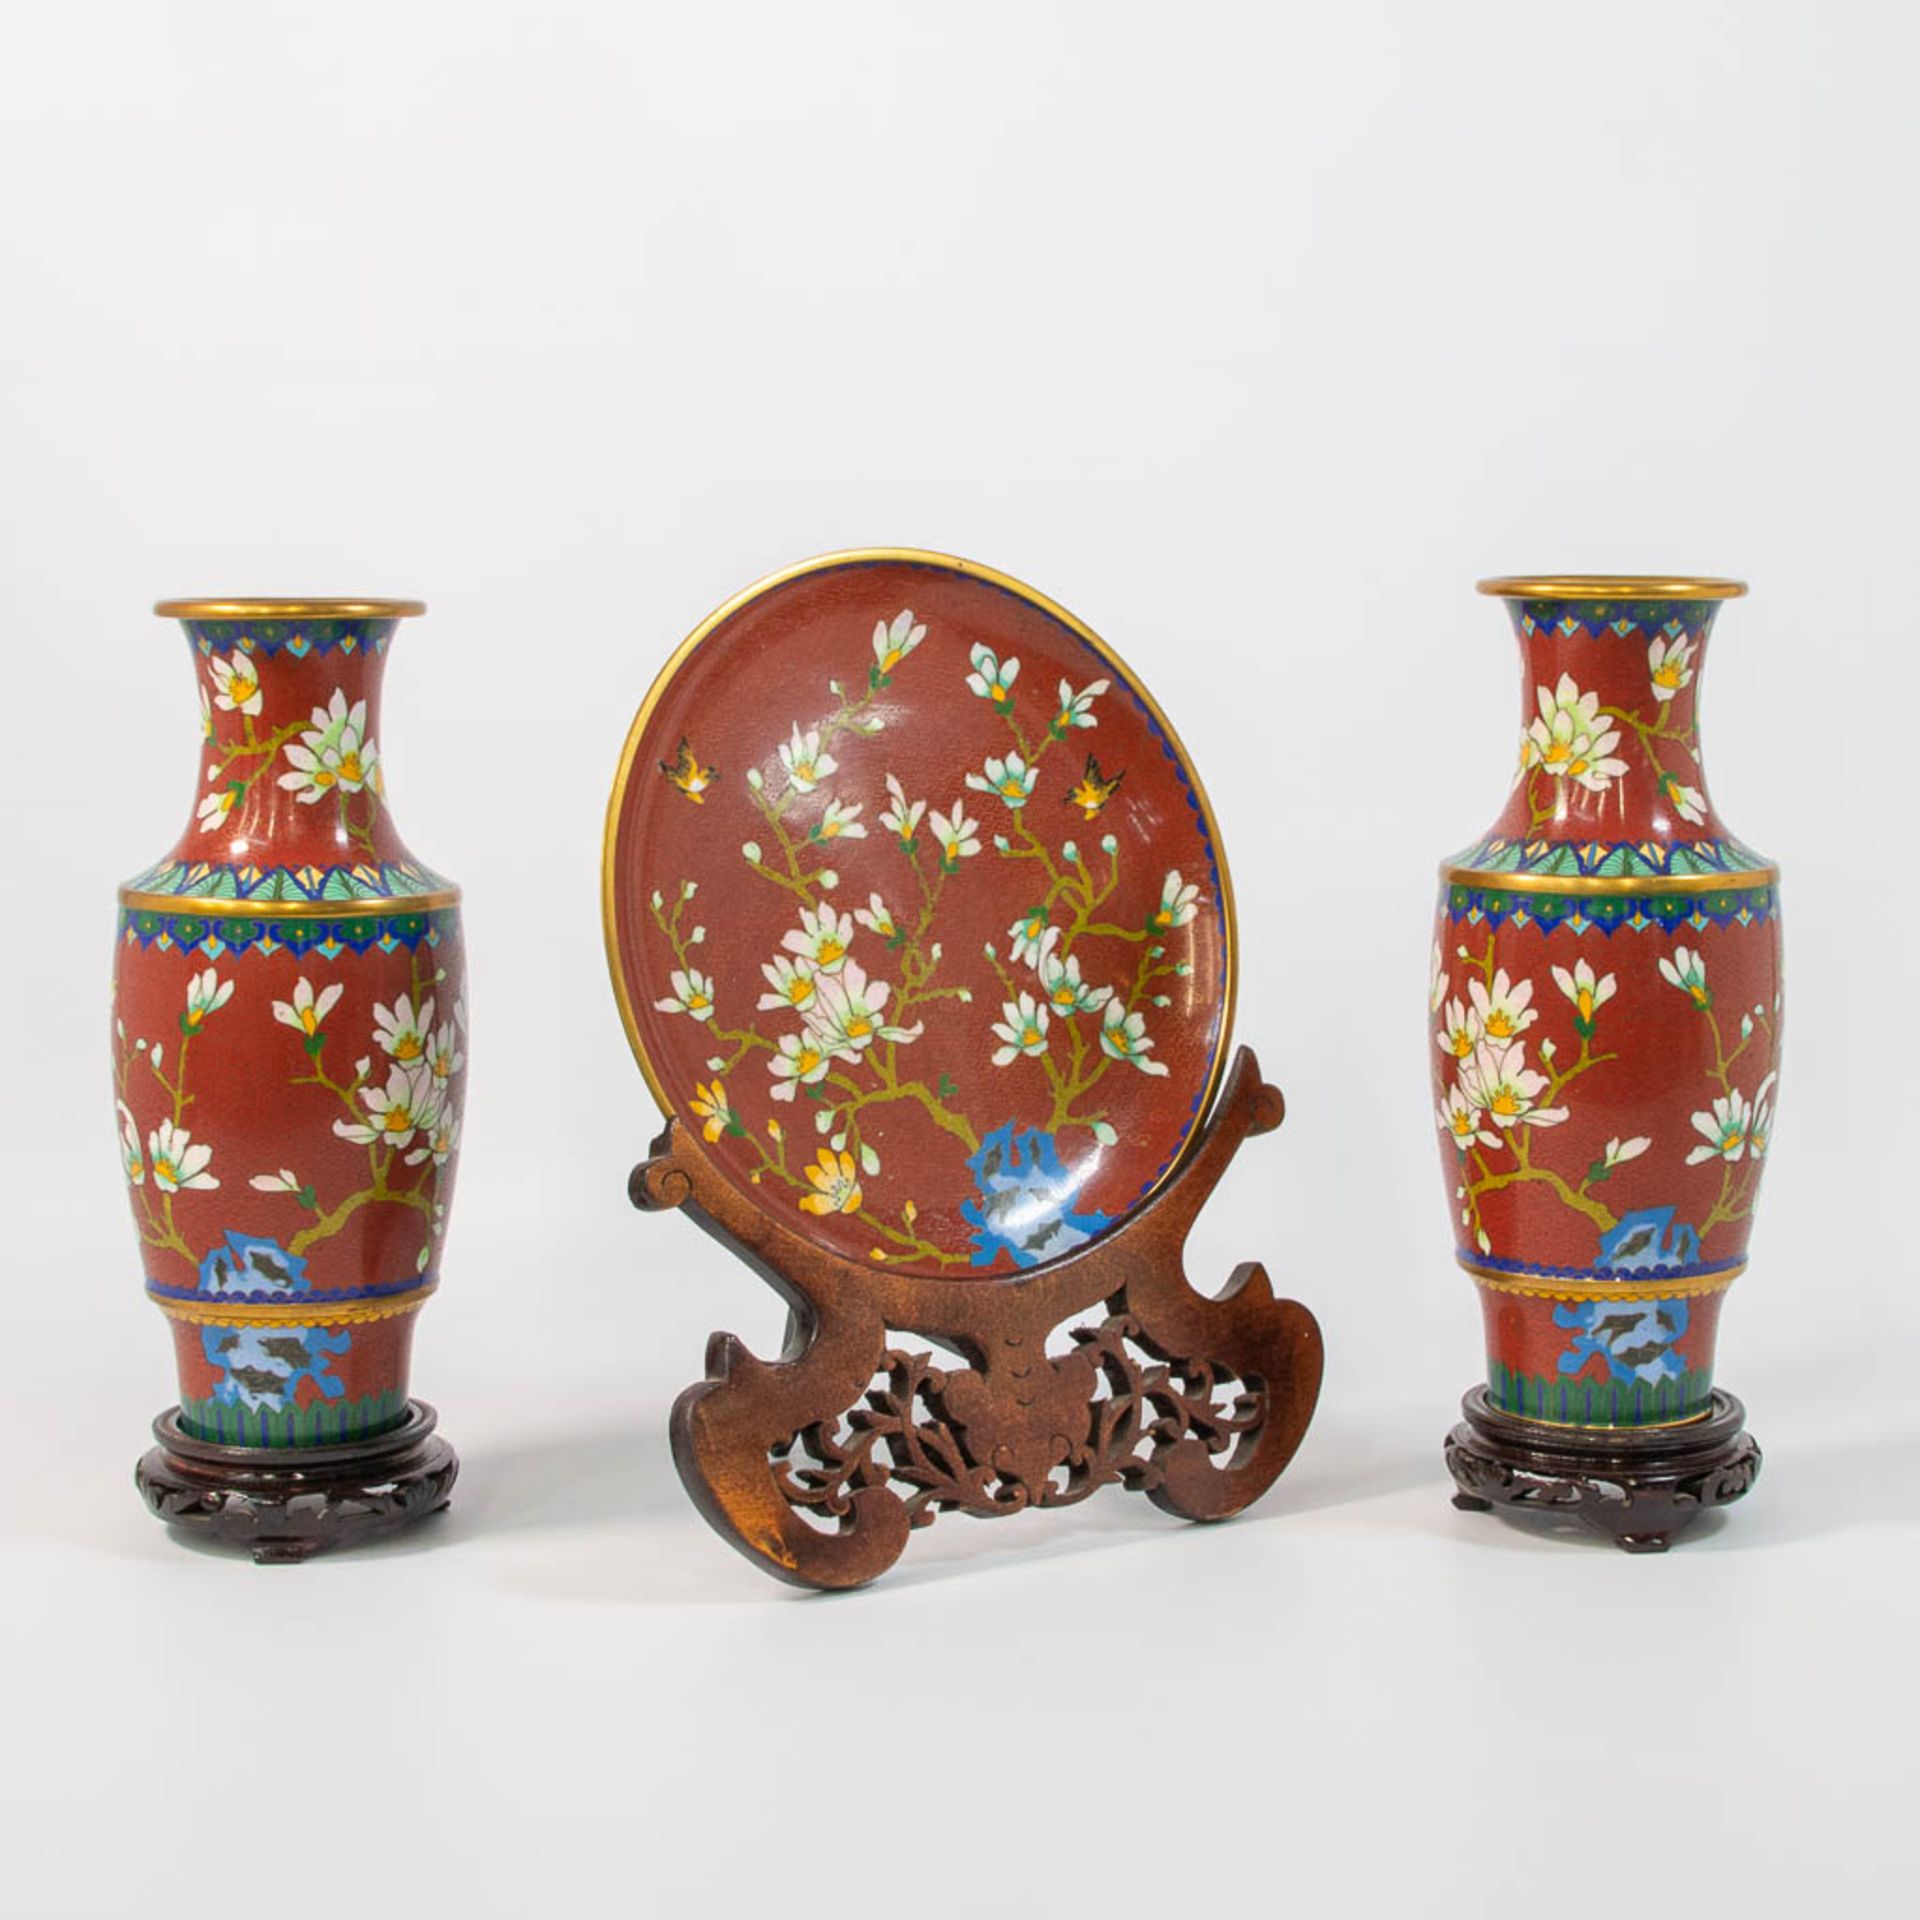 A pair of cloisonné vases and display plate on wood stands. Made of bronze and enamel. - Image 3 of 10